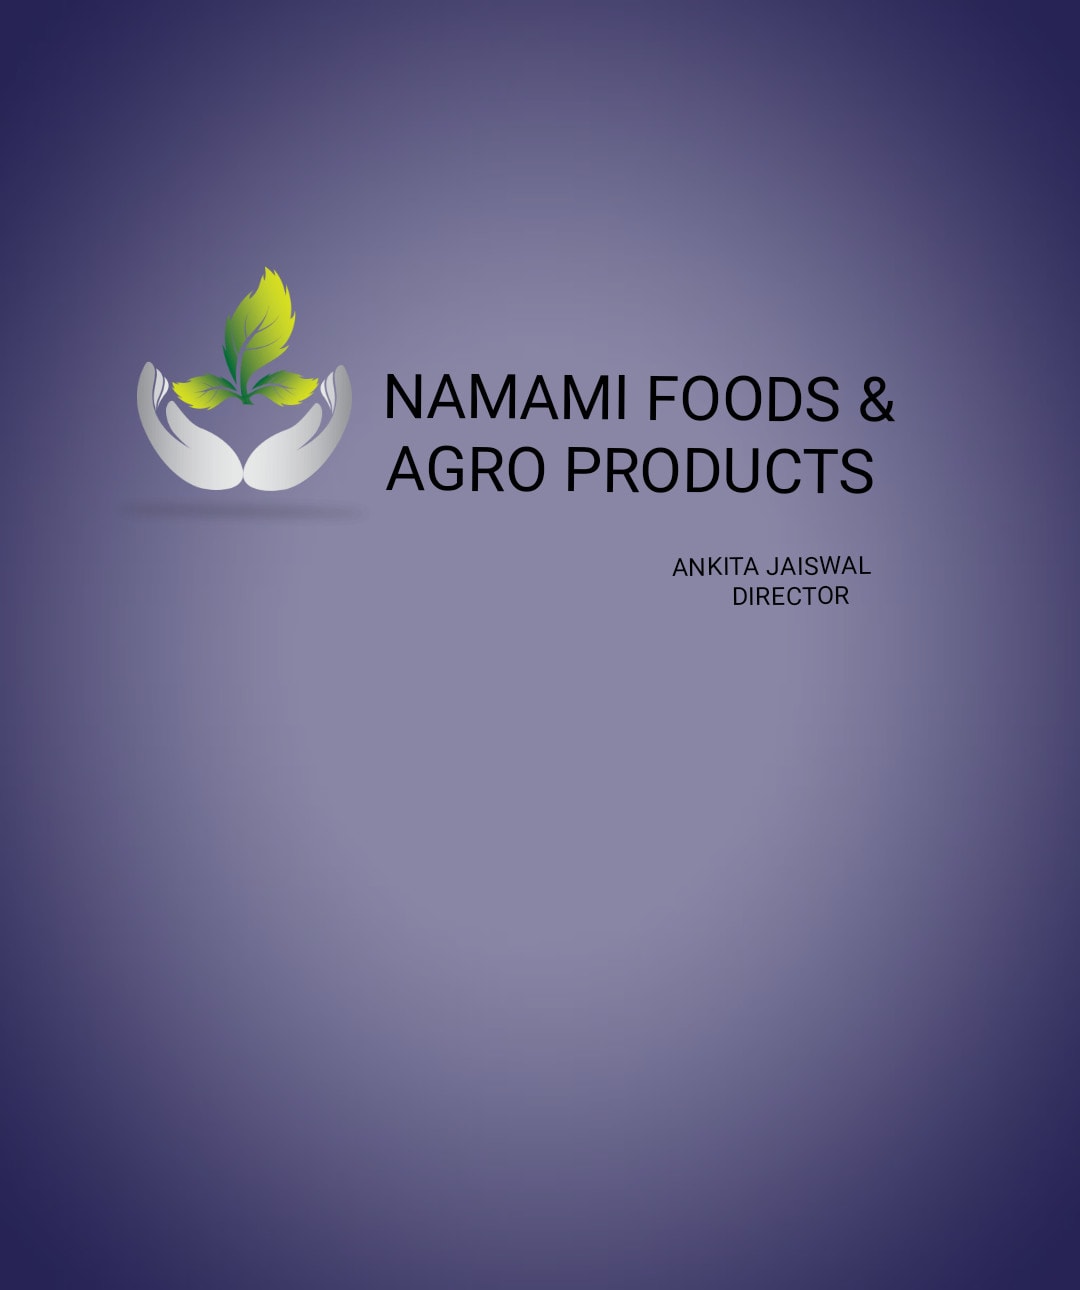 Namami Foods & Agro Products